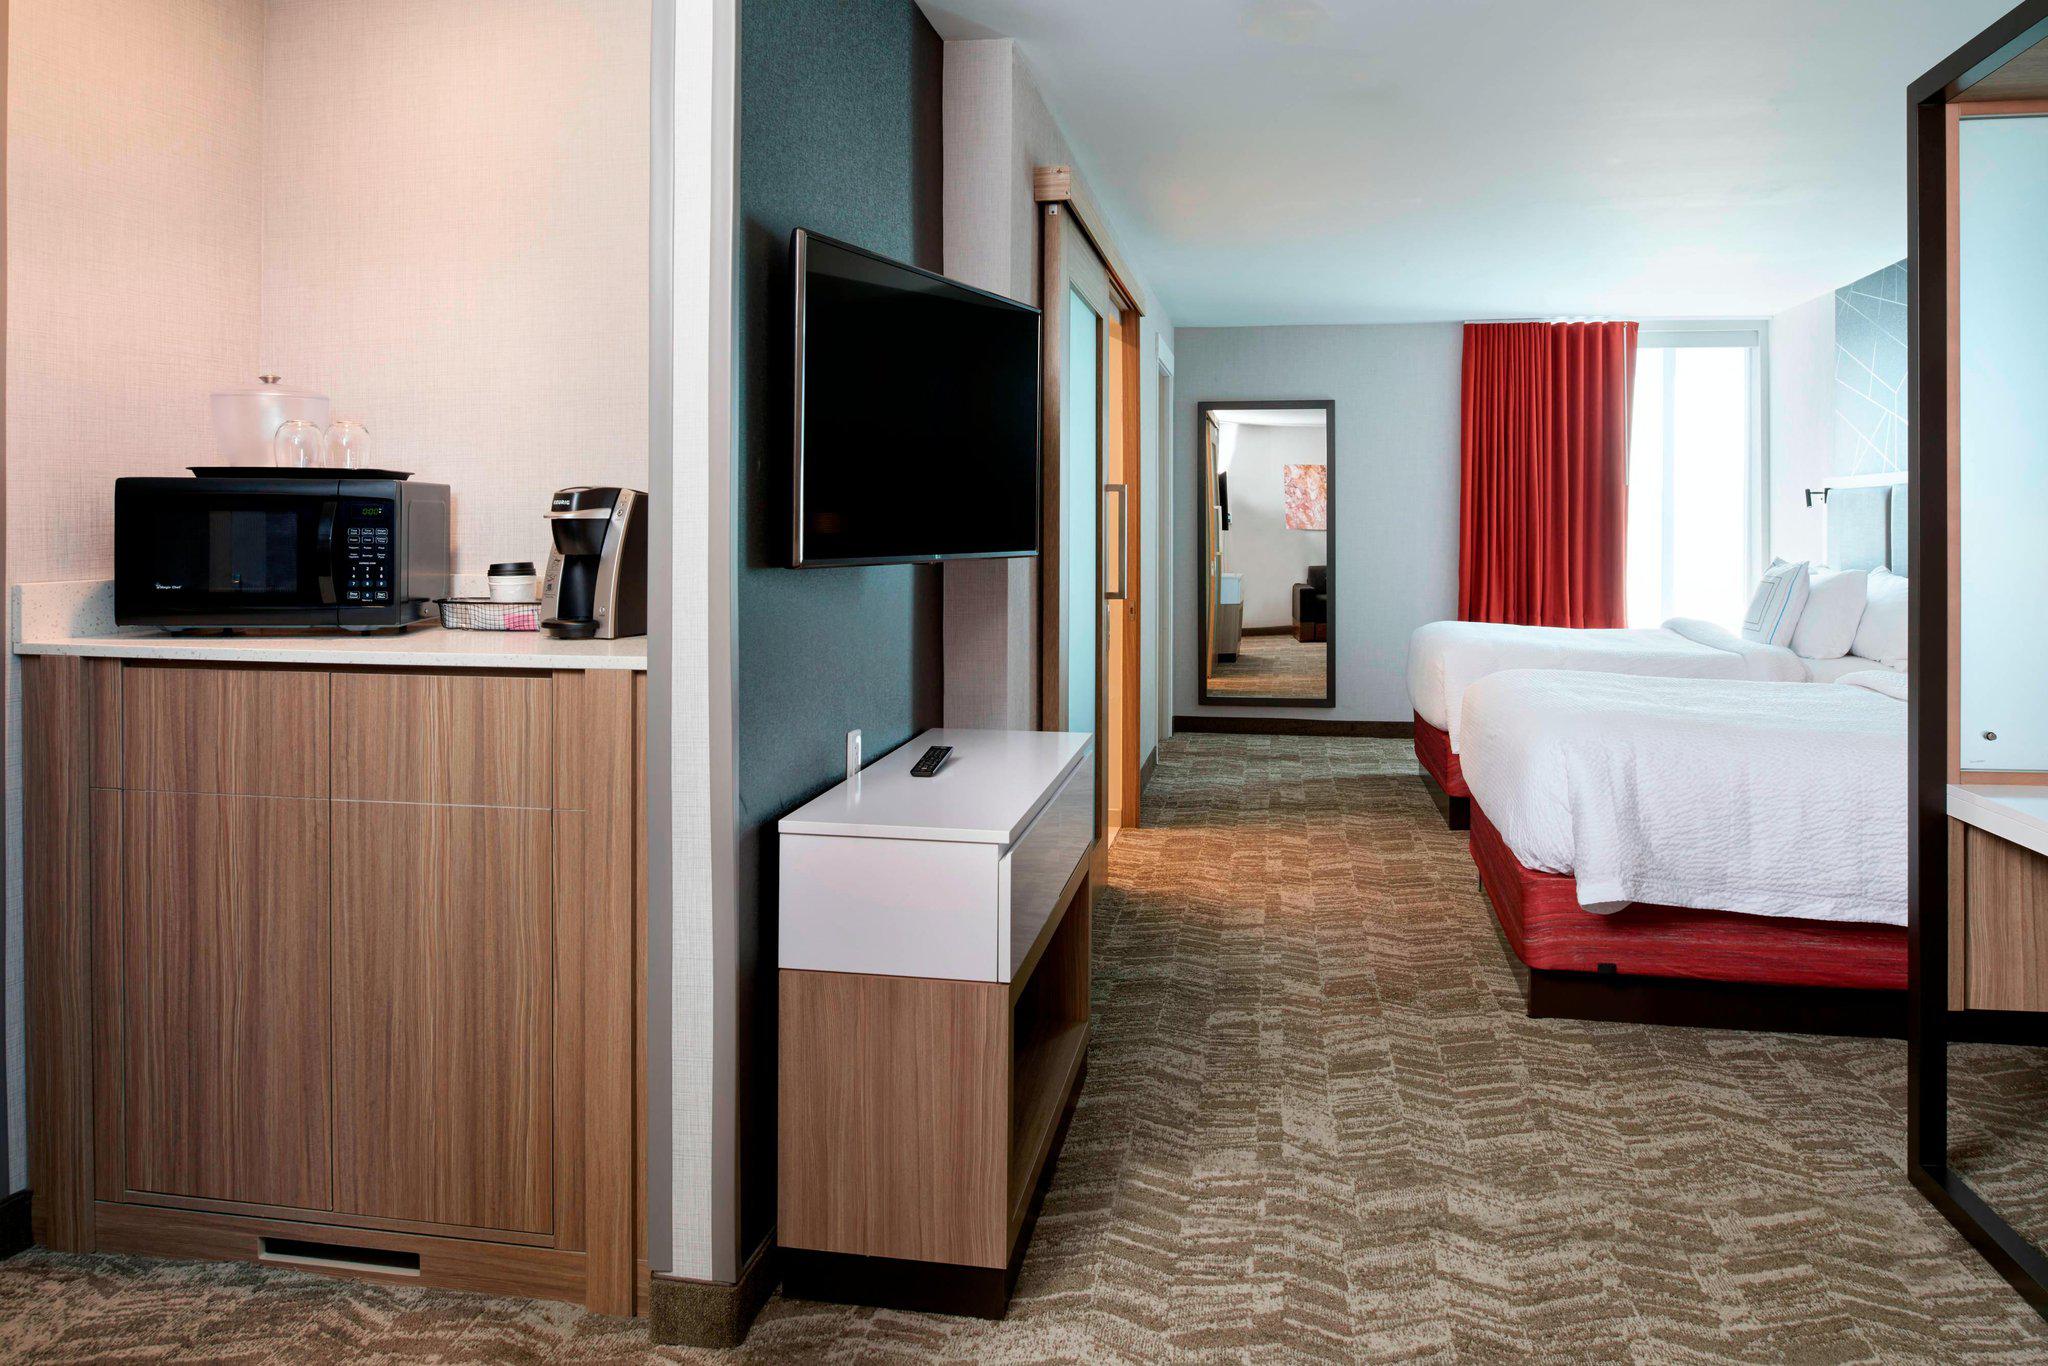 SpringHill Suites by Marriott Grand Rapids West Photo